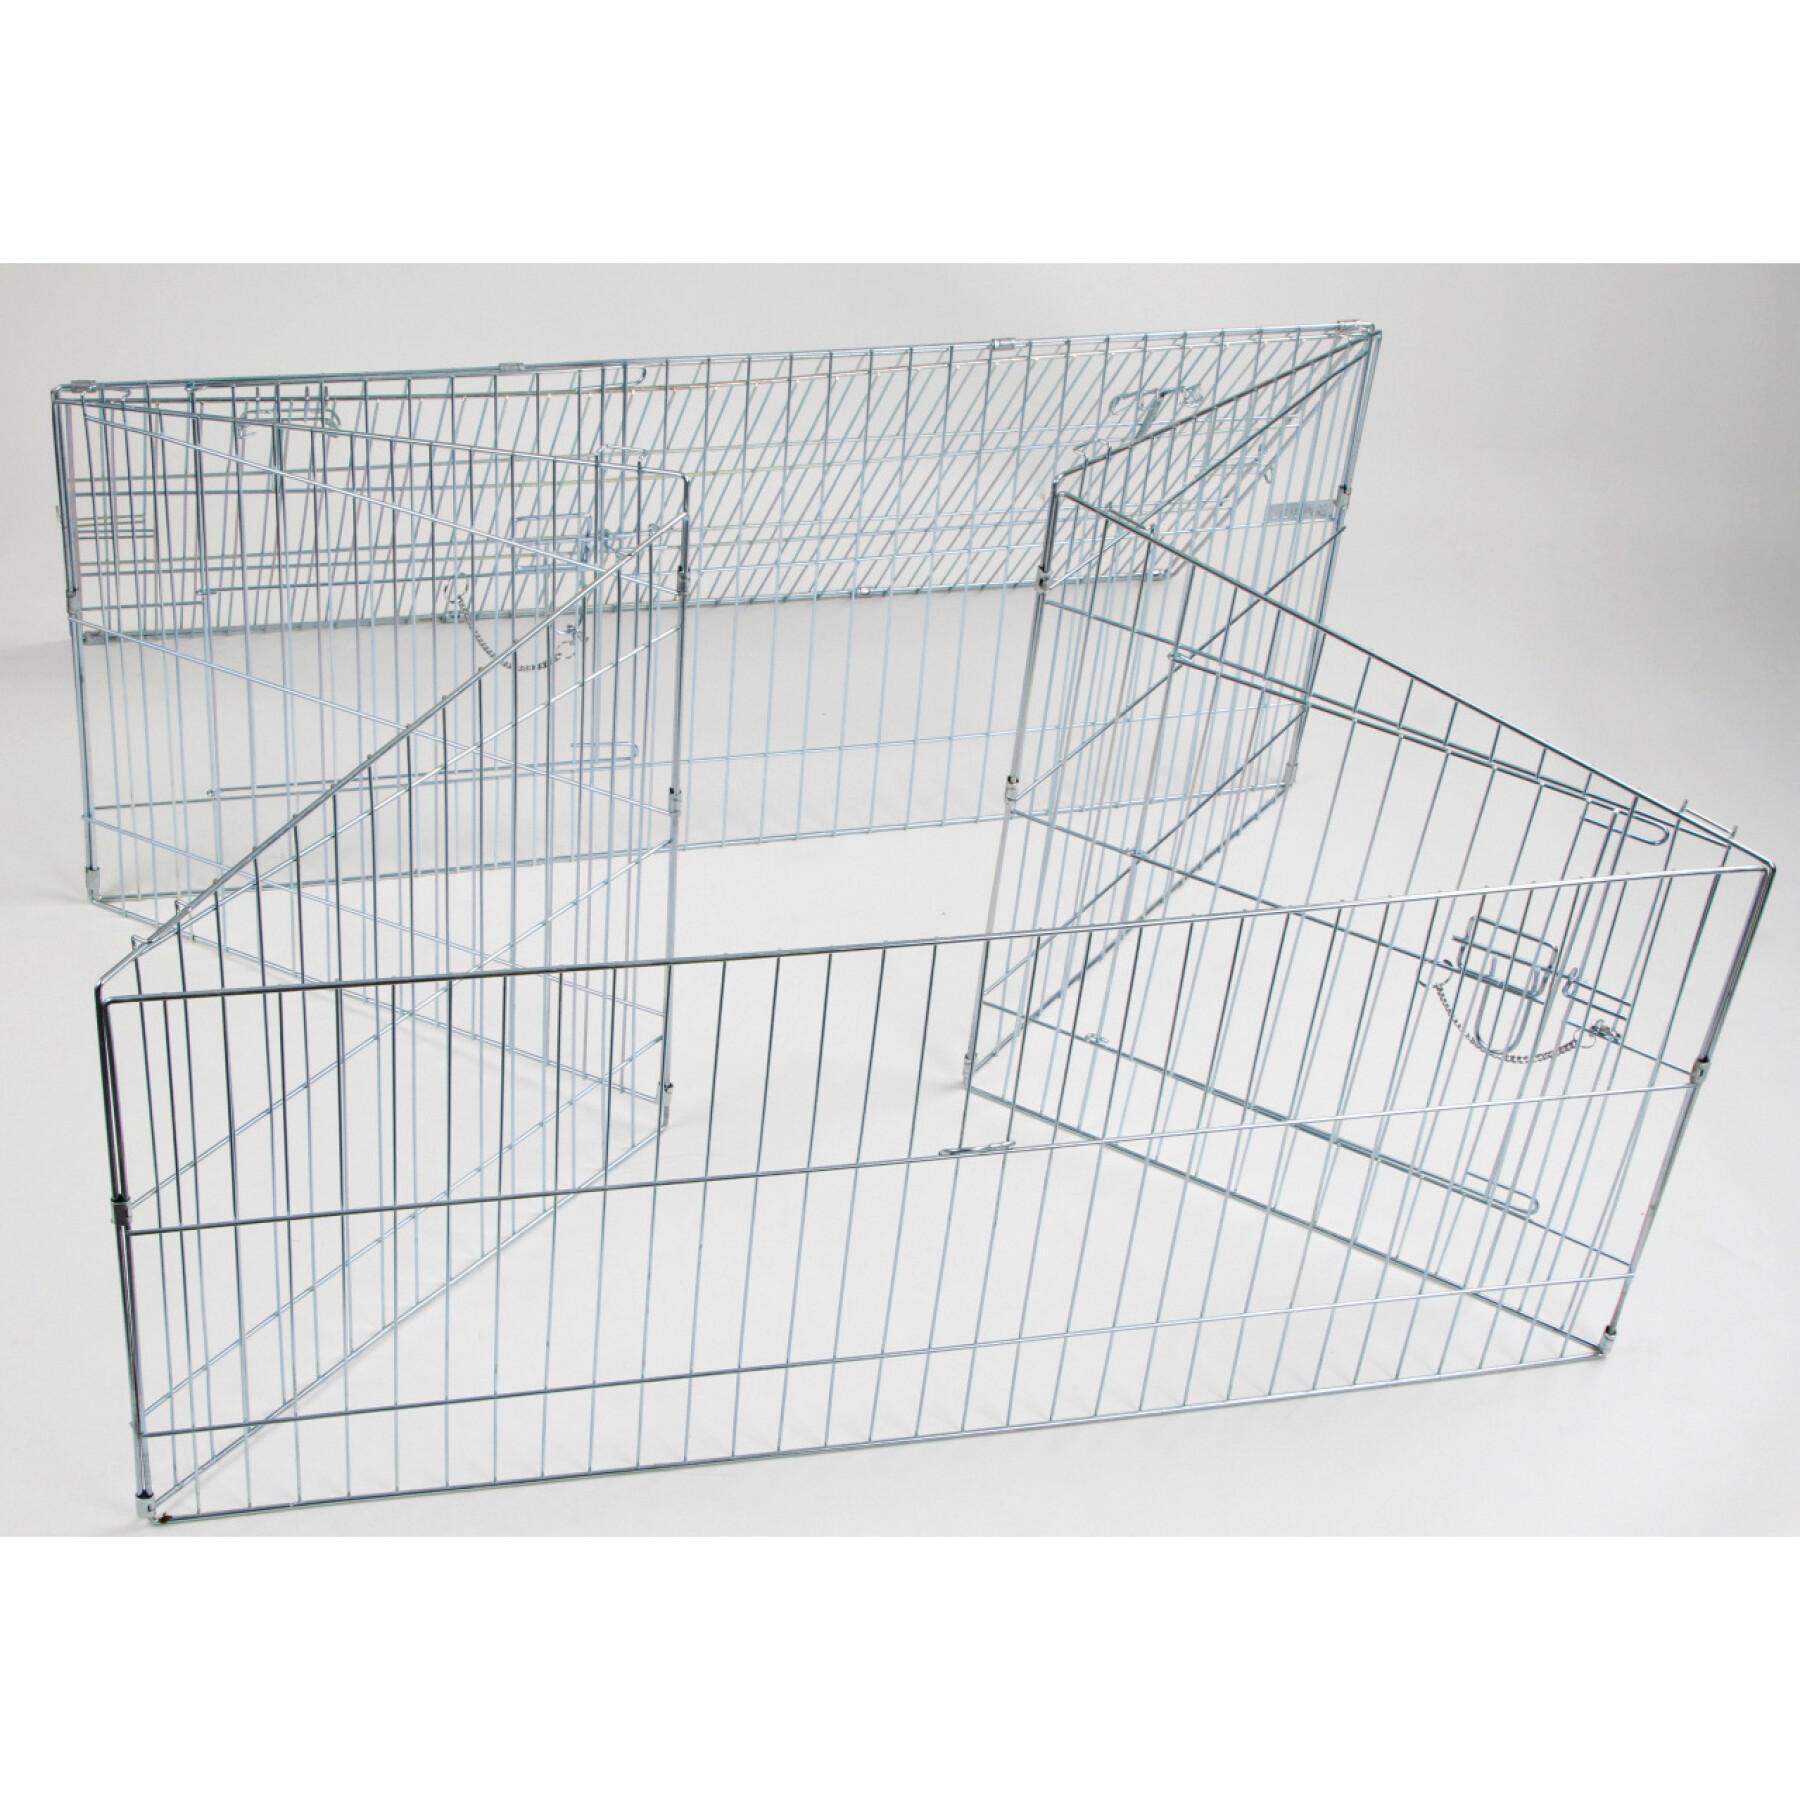 Outdoor enclosure for rodents Kerbl Easy